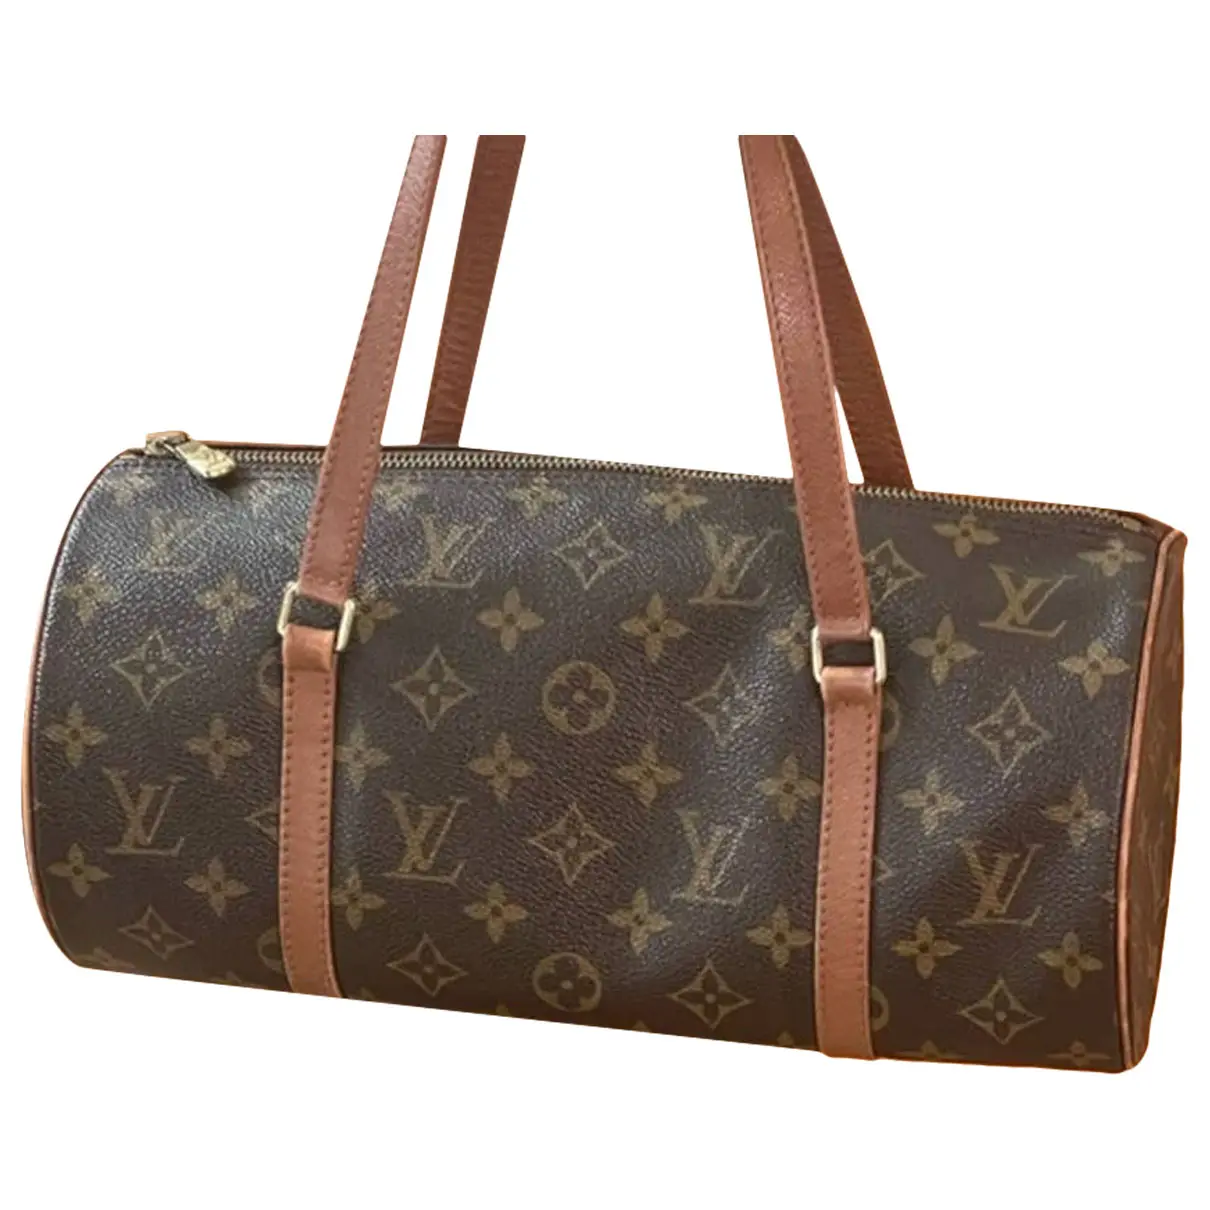 Leather tote Louis Vuitton